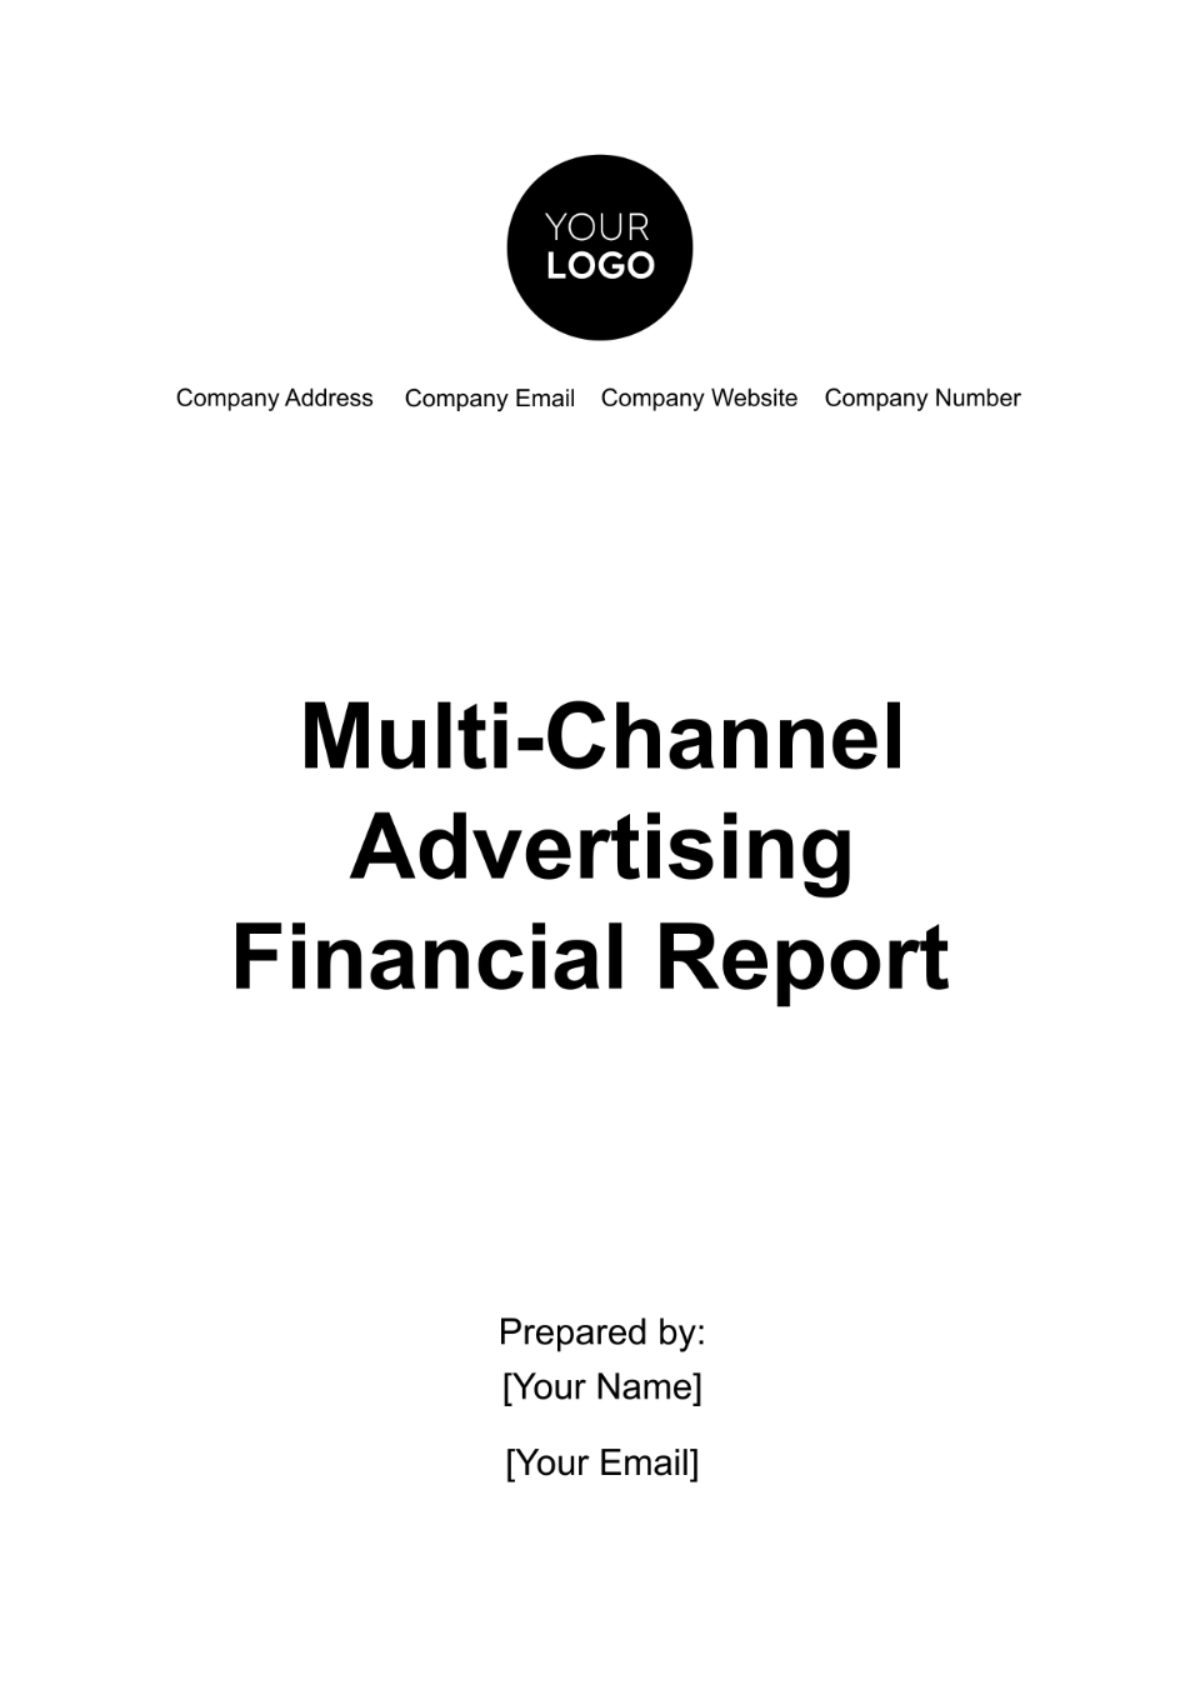 Multi-Channel Advertising Financial Report Template